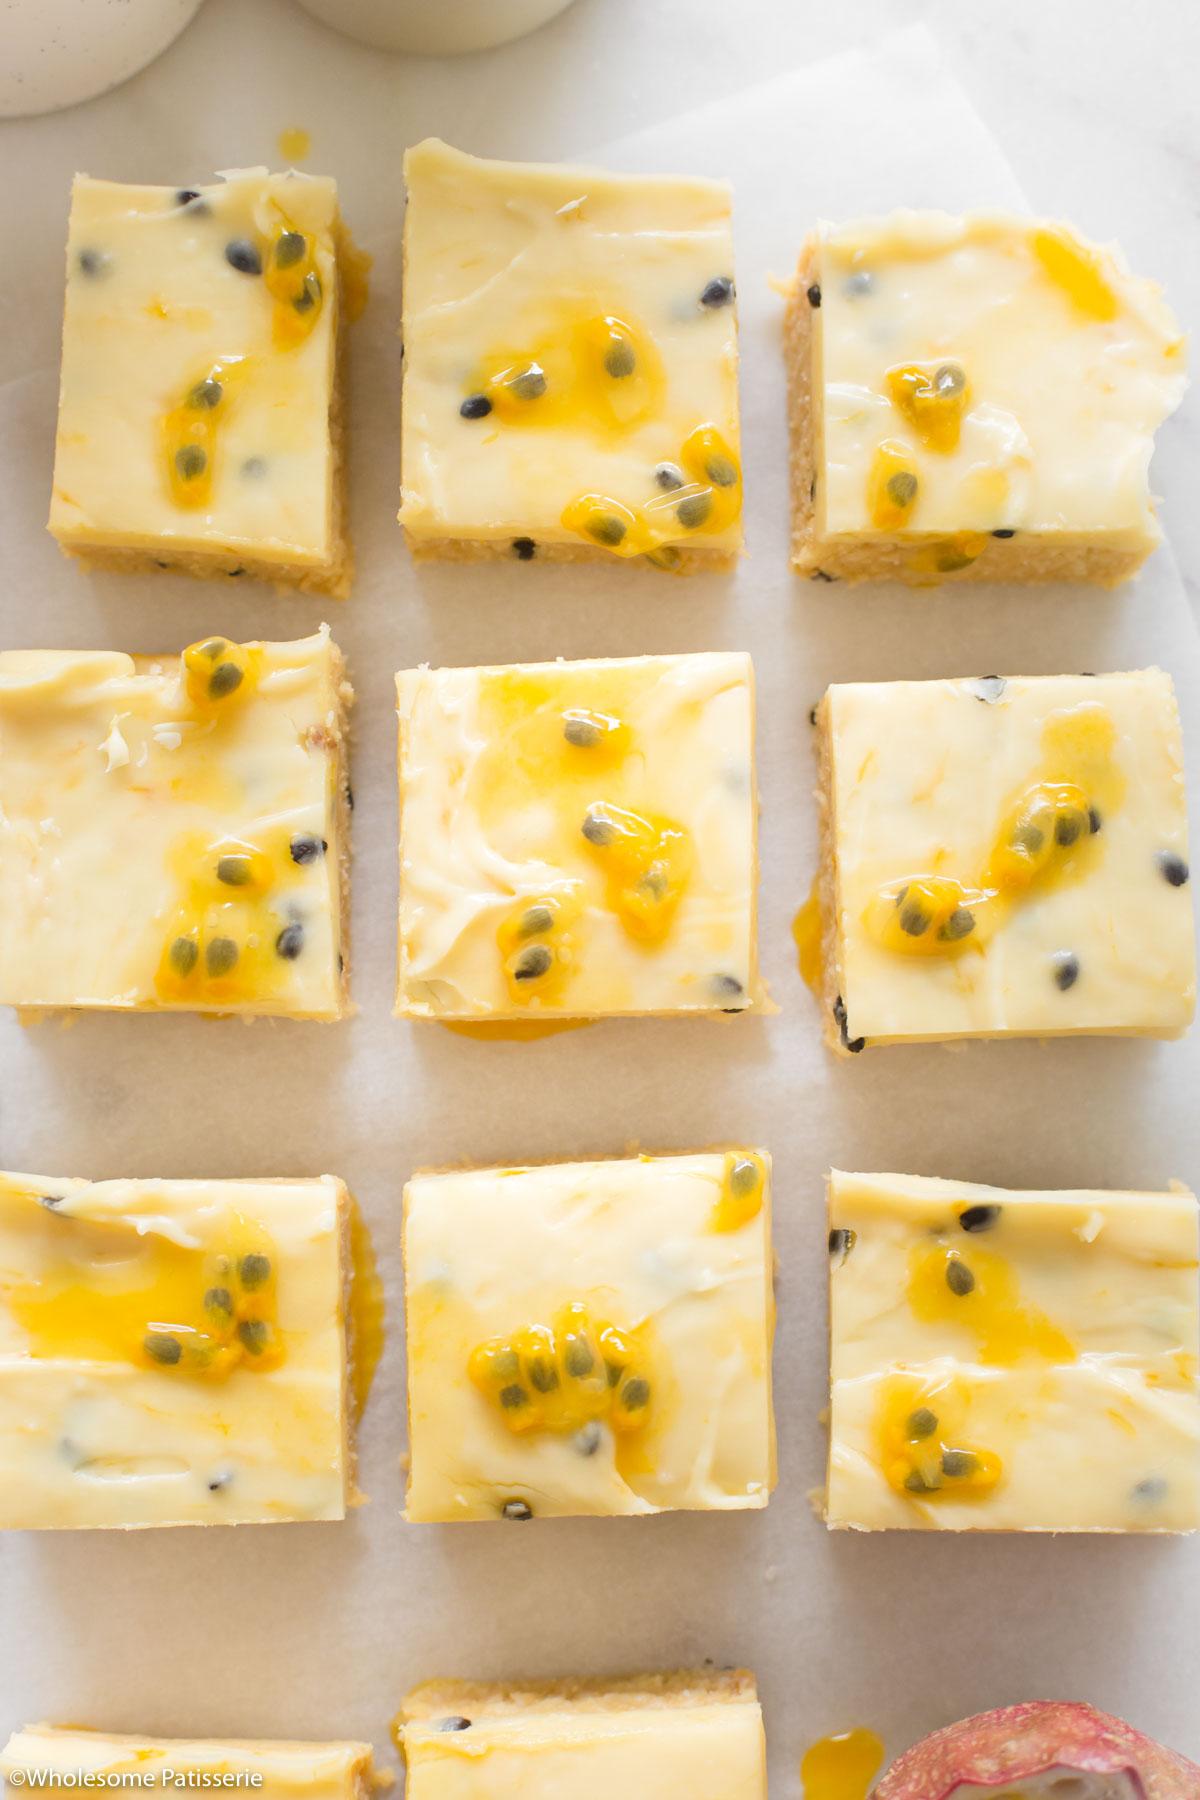 Overhead shot of the passionfruit slices decorated with fresh passionfruit pulp.